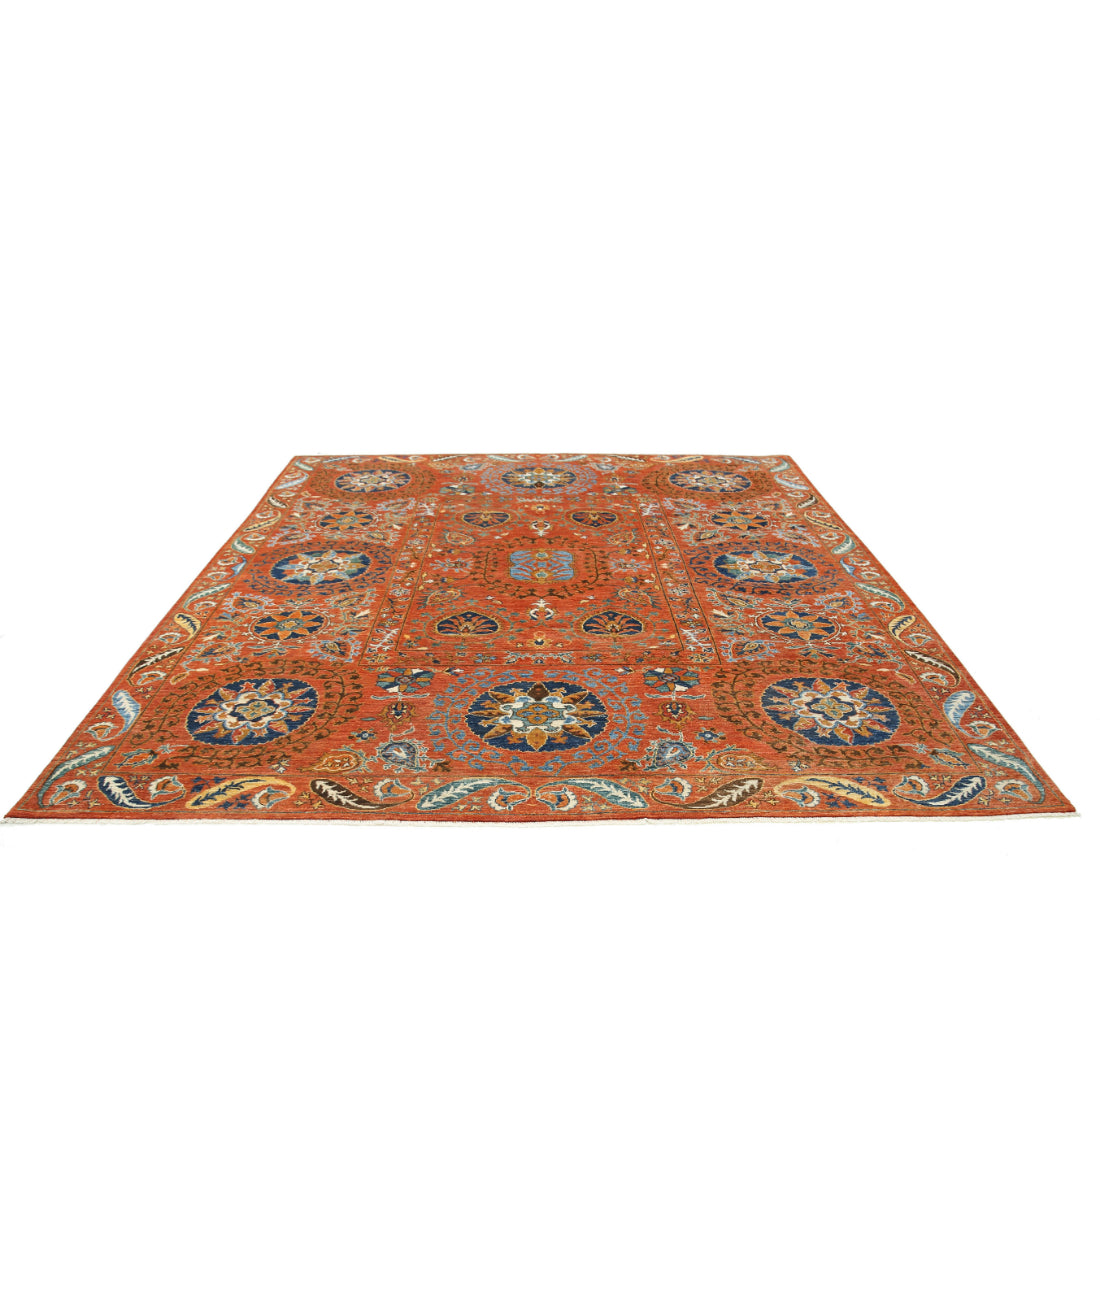 Hand Knotted Nomadic Caucasian Humna Wool Rug - 9'8'' x 10'4'' 9'8'' x 10'4'' (290 X 310) / Rust / Blue